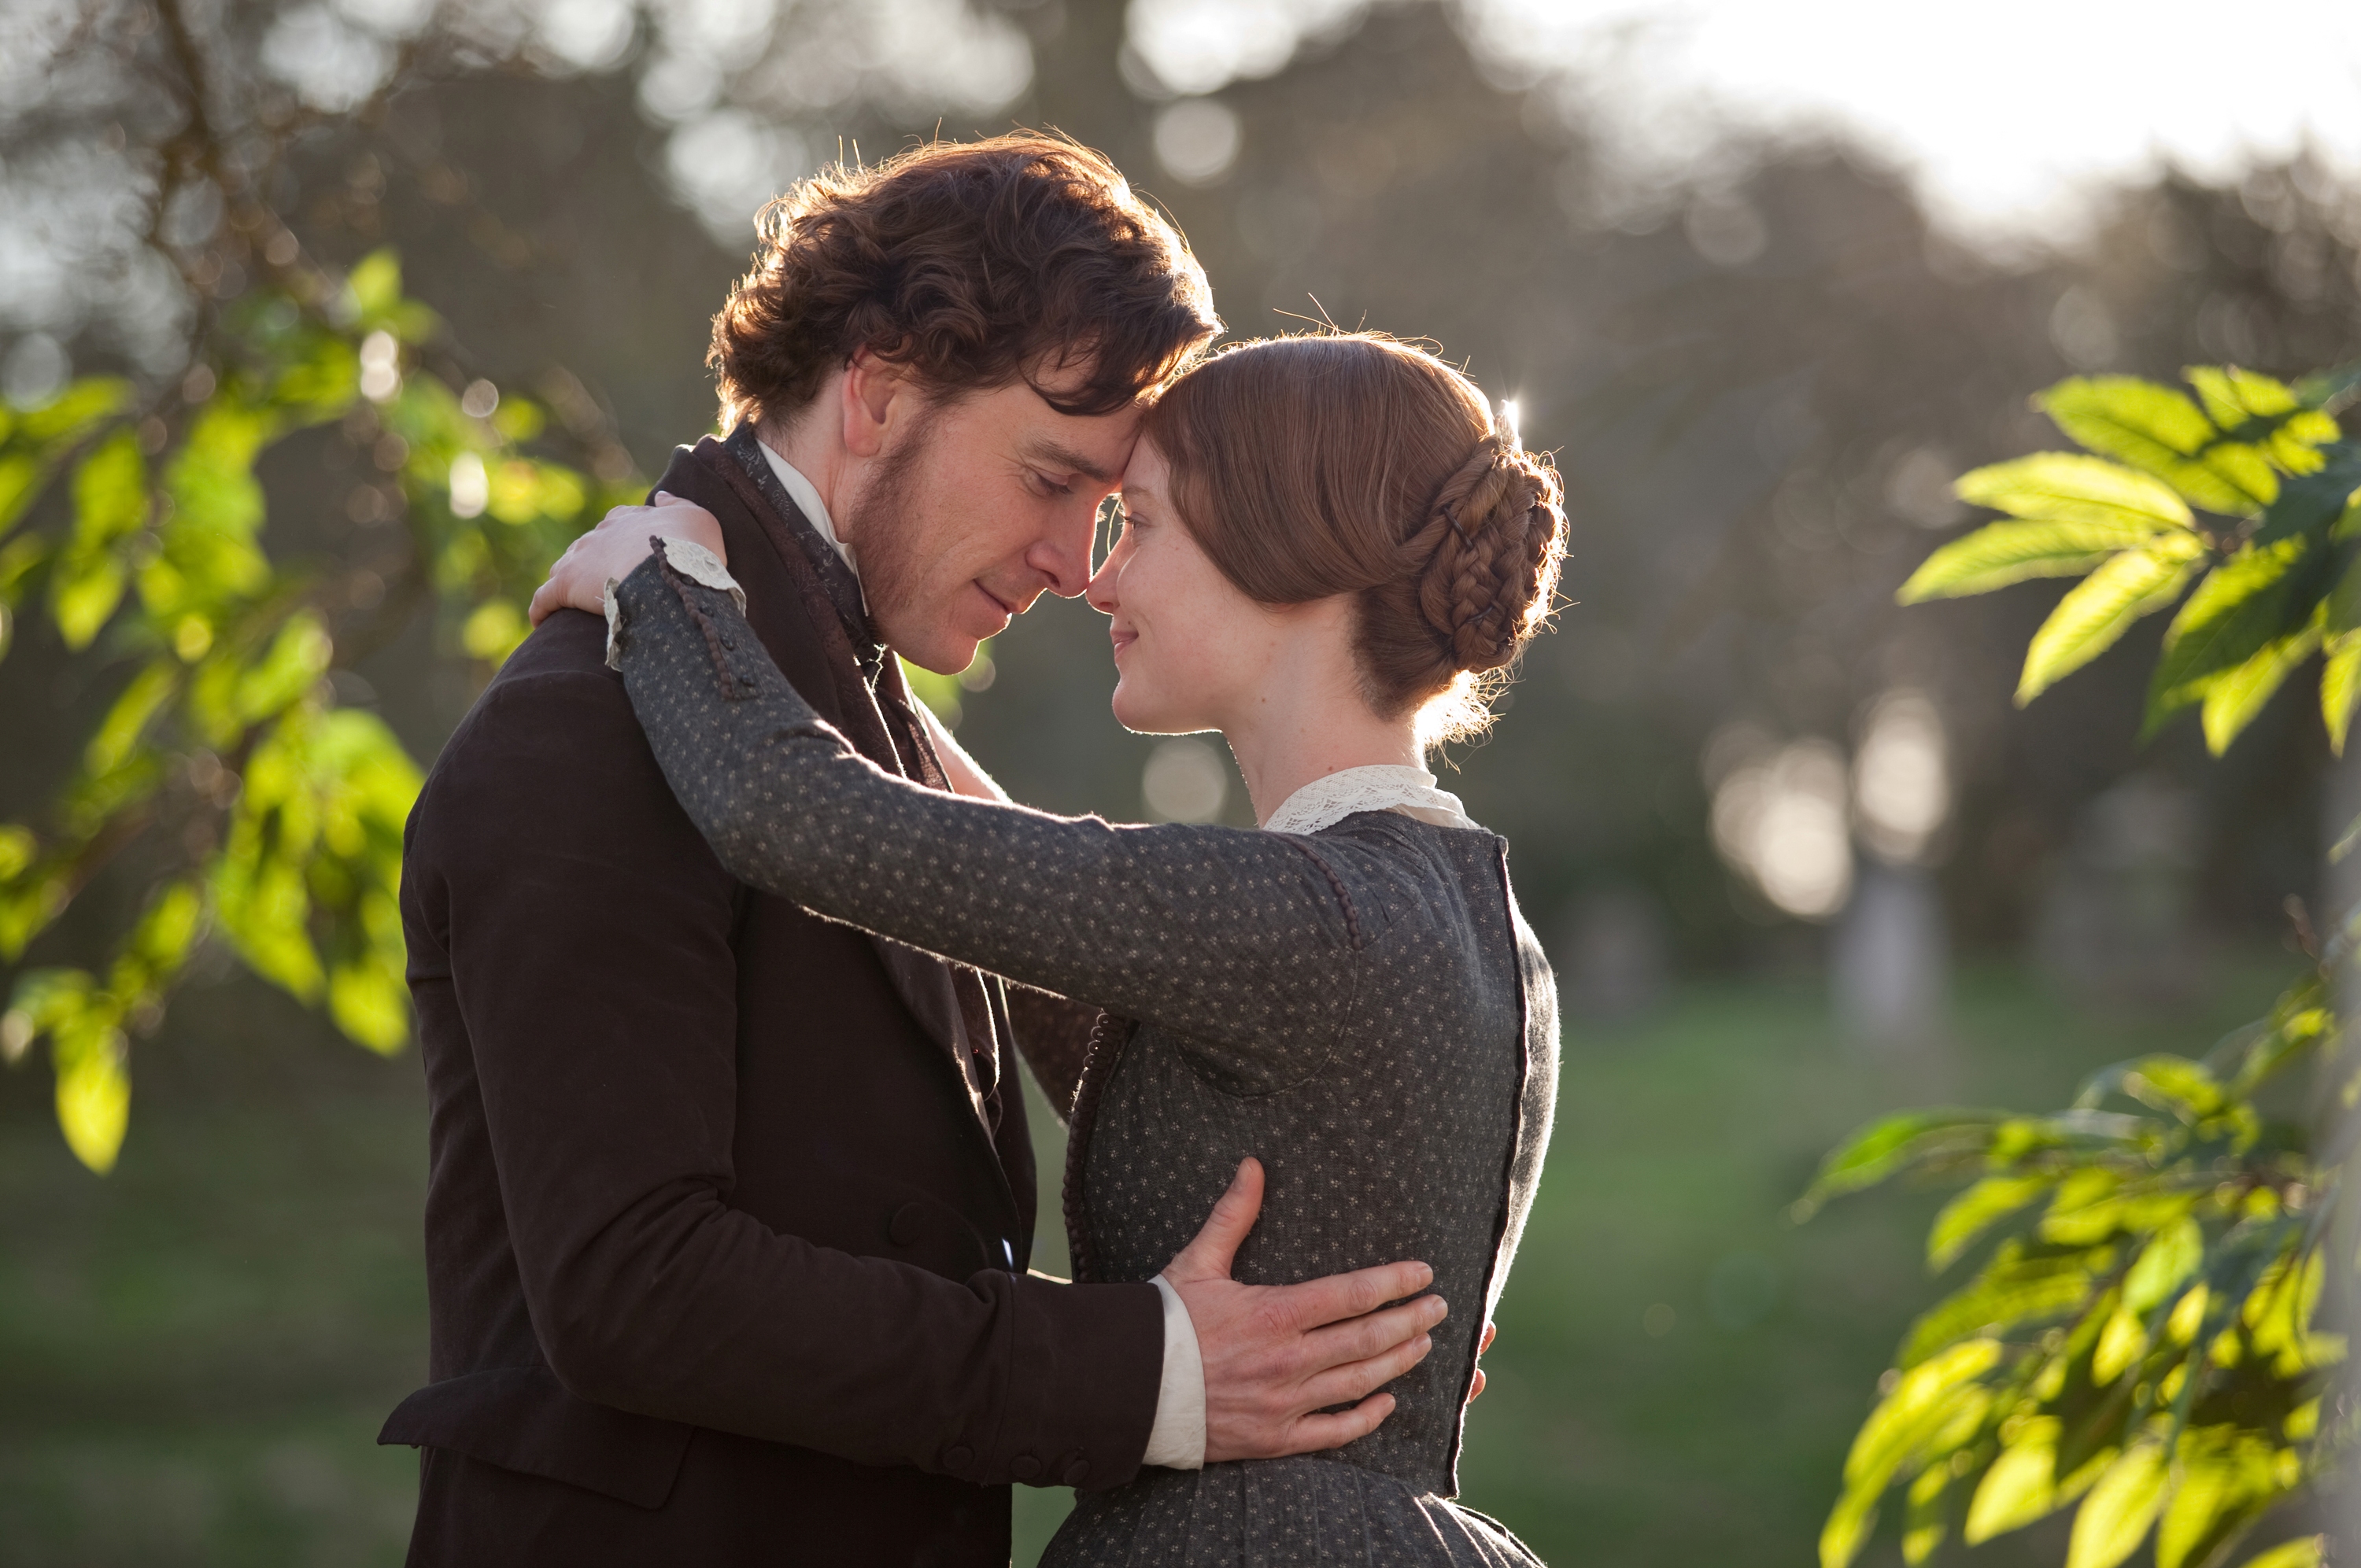 Michael Fassbender (left) and Mia Wasikowska (right) in the romantic drama JANE EYRE, a Focus Features release directed by Cary Fukunaga.  Photo Credit: Laurie Sparham